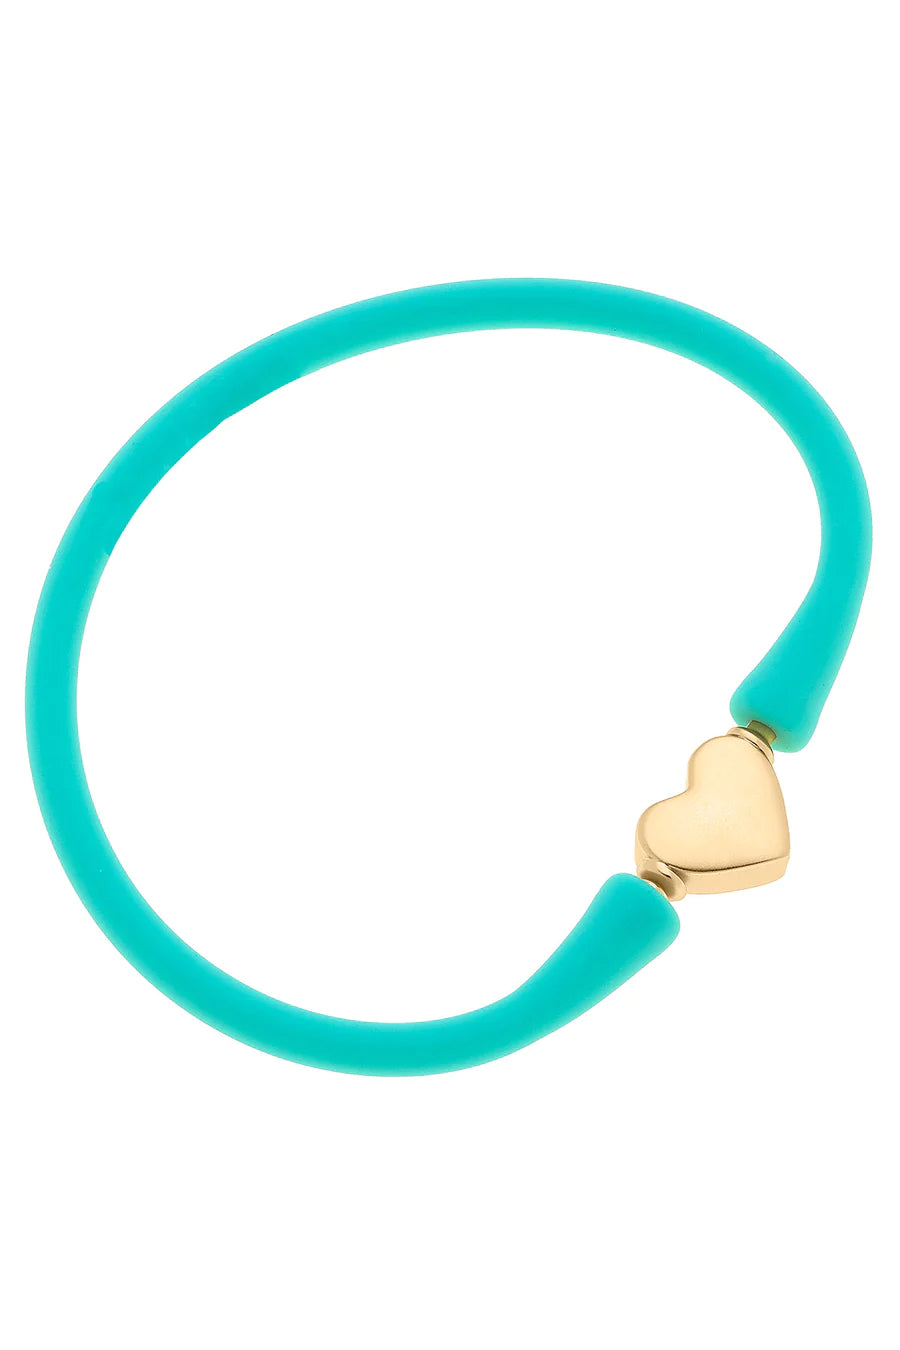 Bali Heart Bead Silicone Children's Braclet in Mint